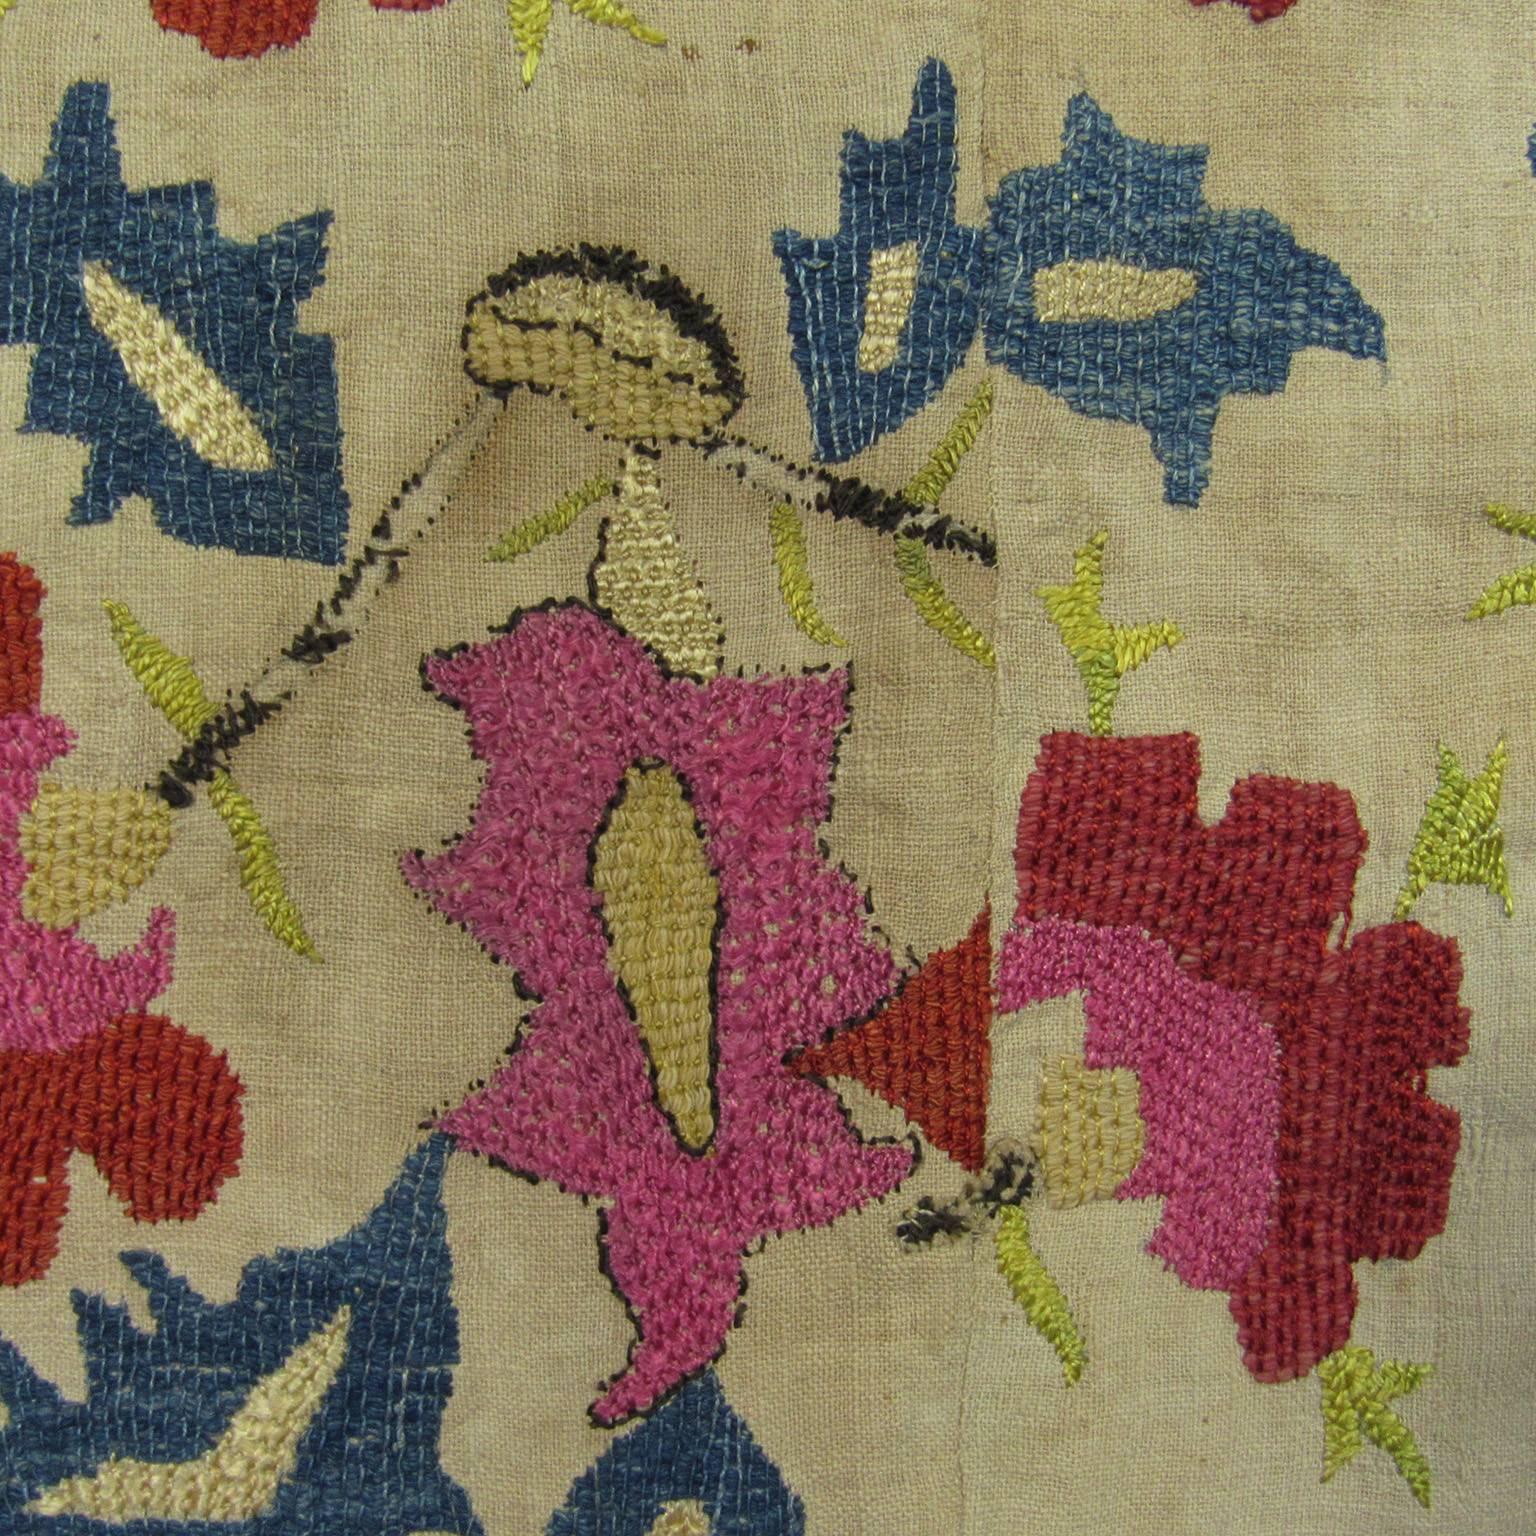 18th Century Ottoman Embroidered Textile Fragment. Floral design on linen foundation.  37 x 30 1/2 in. 